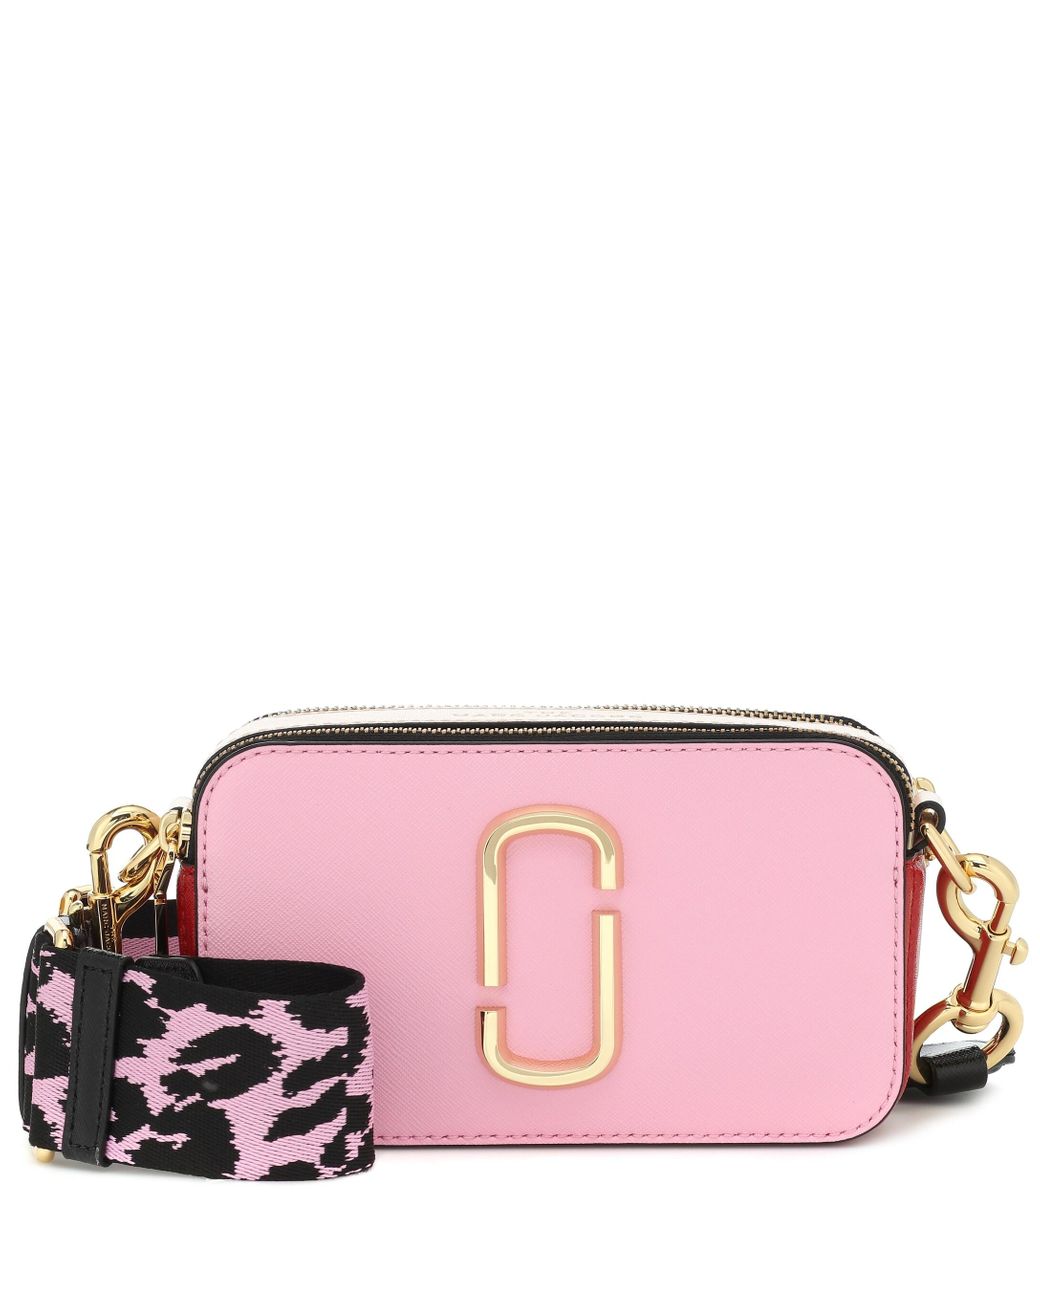 Marc Jacobs Snapshot Small Leather Camera Bag in Pink - Lyst